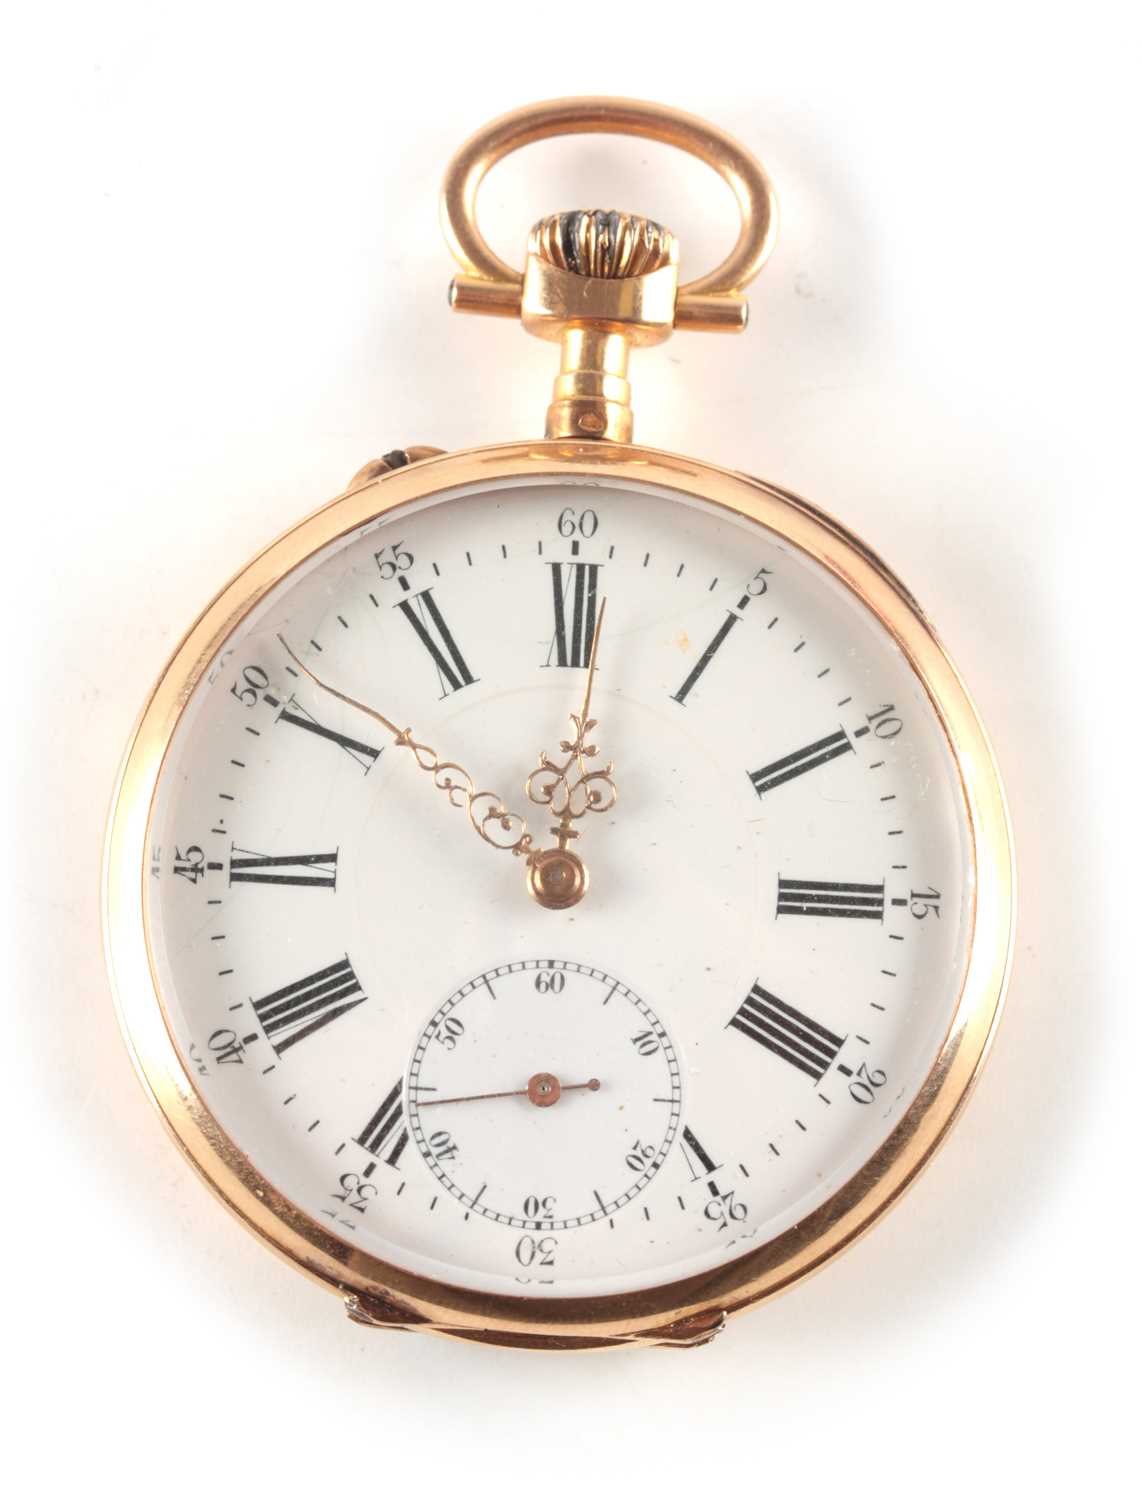 Lot 198 - AN EARLY 20TH CENTURY FRENCH 18CT GOLD OPEN FACE POCKET WATCH